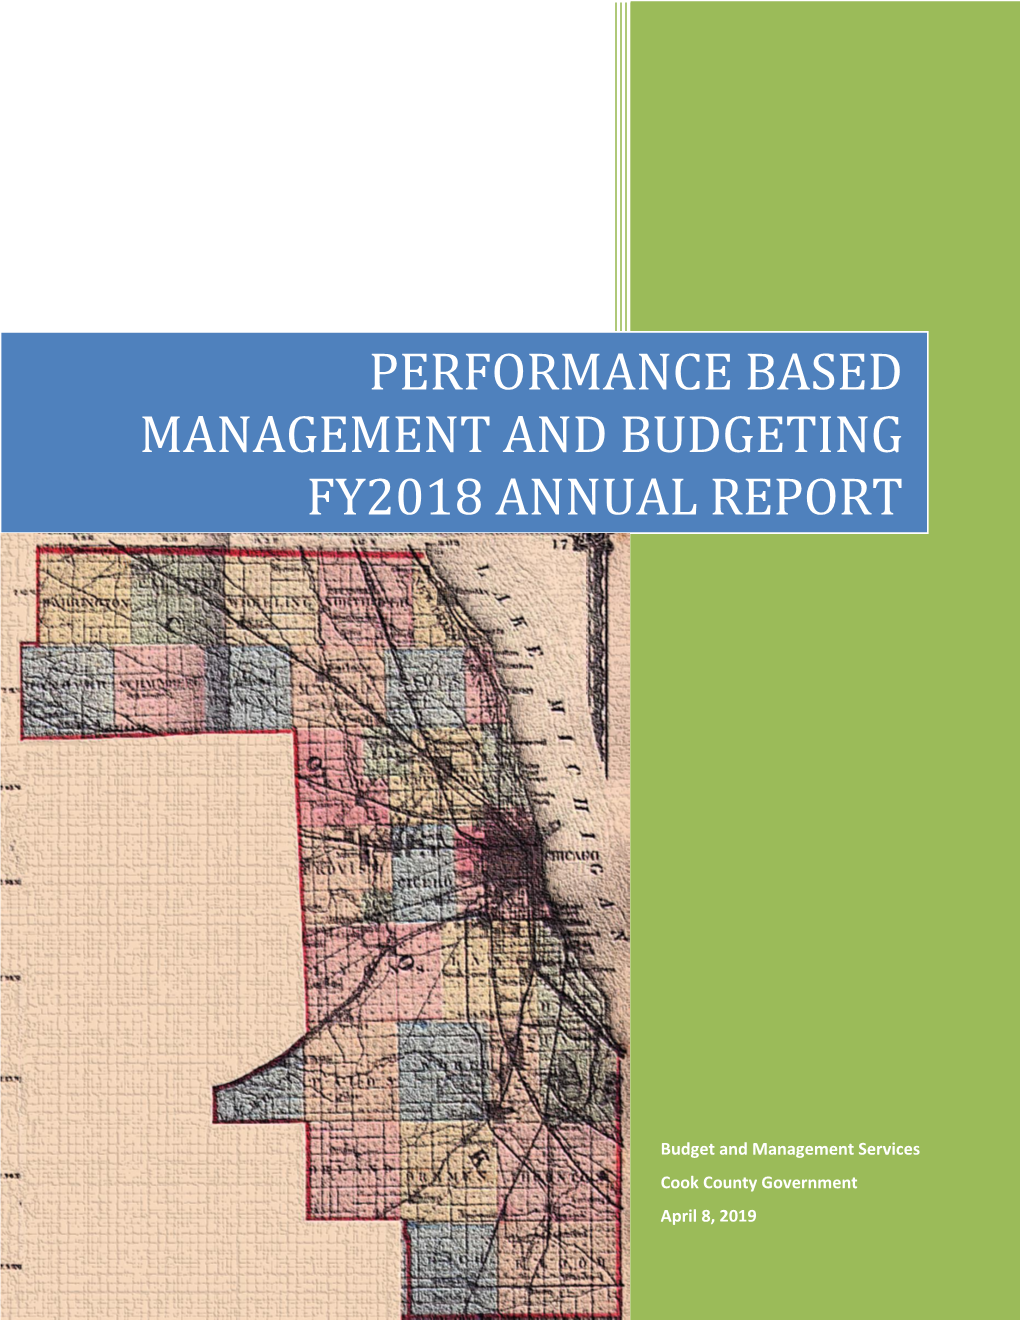 Performance Based Management and Budgeting Fy2018 Annual Report